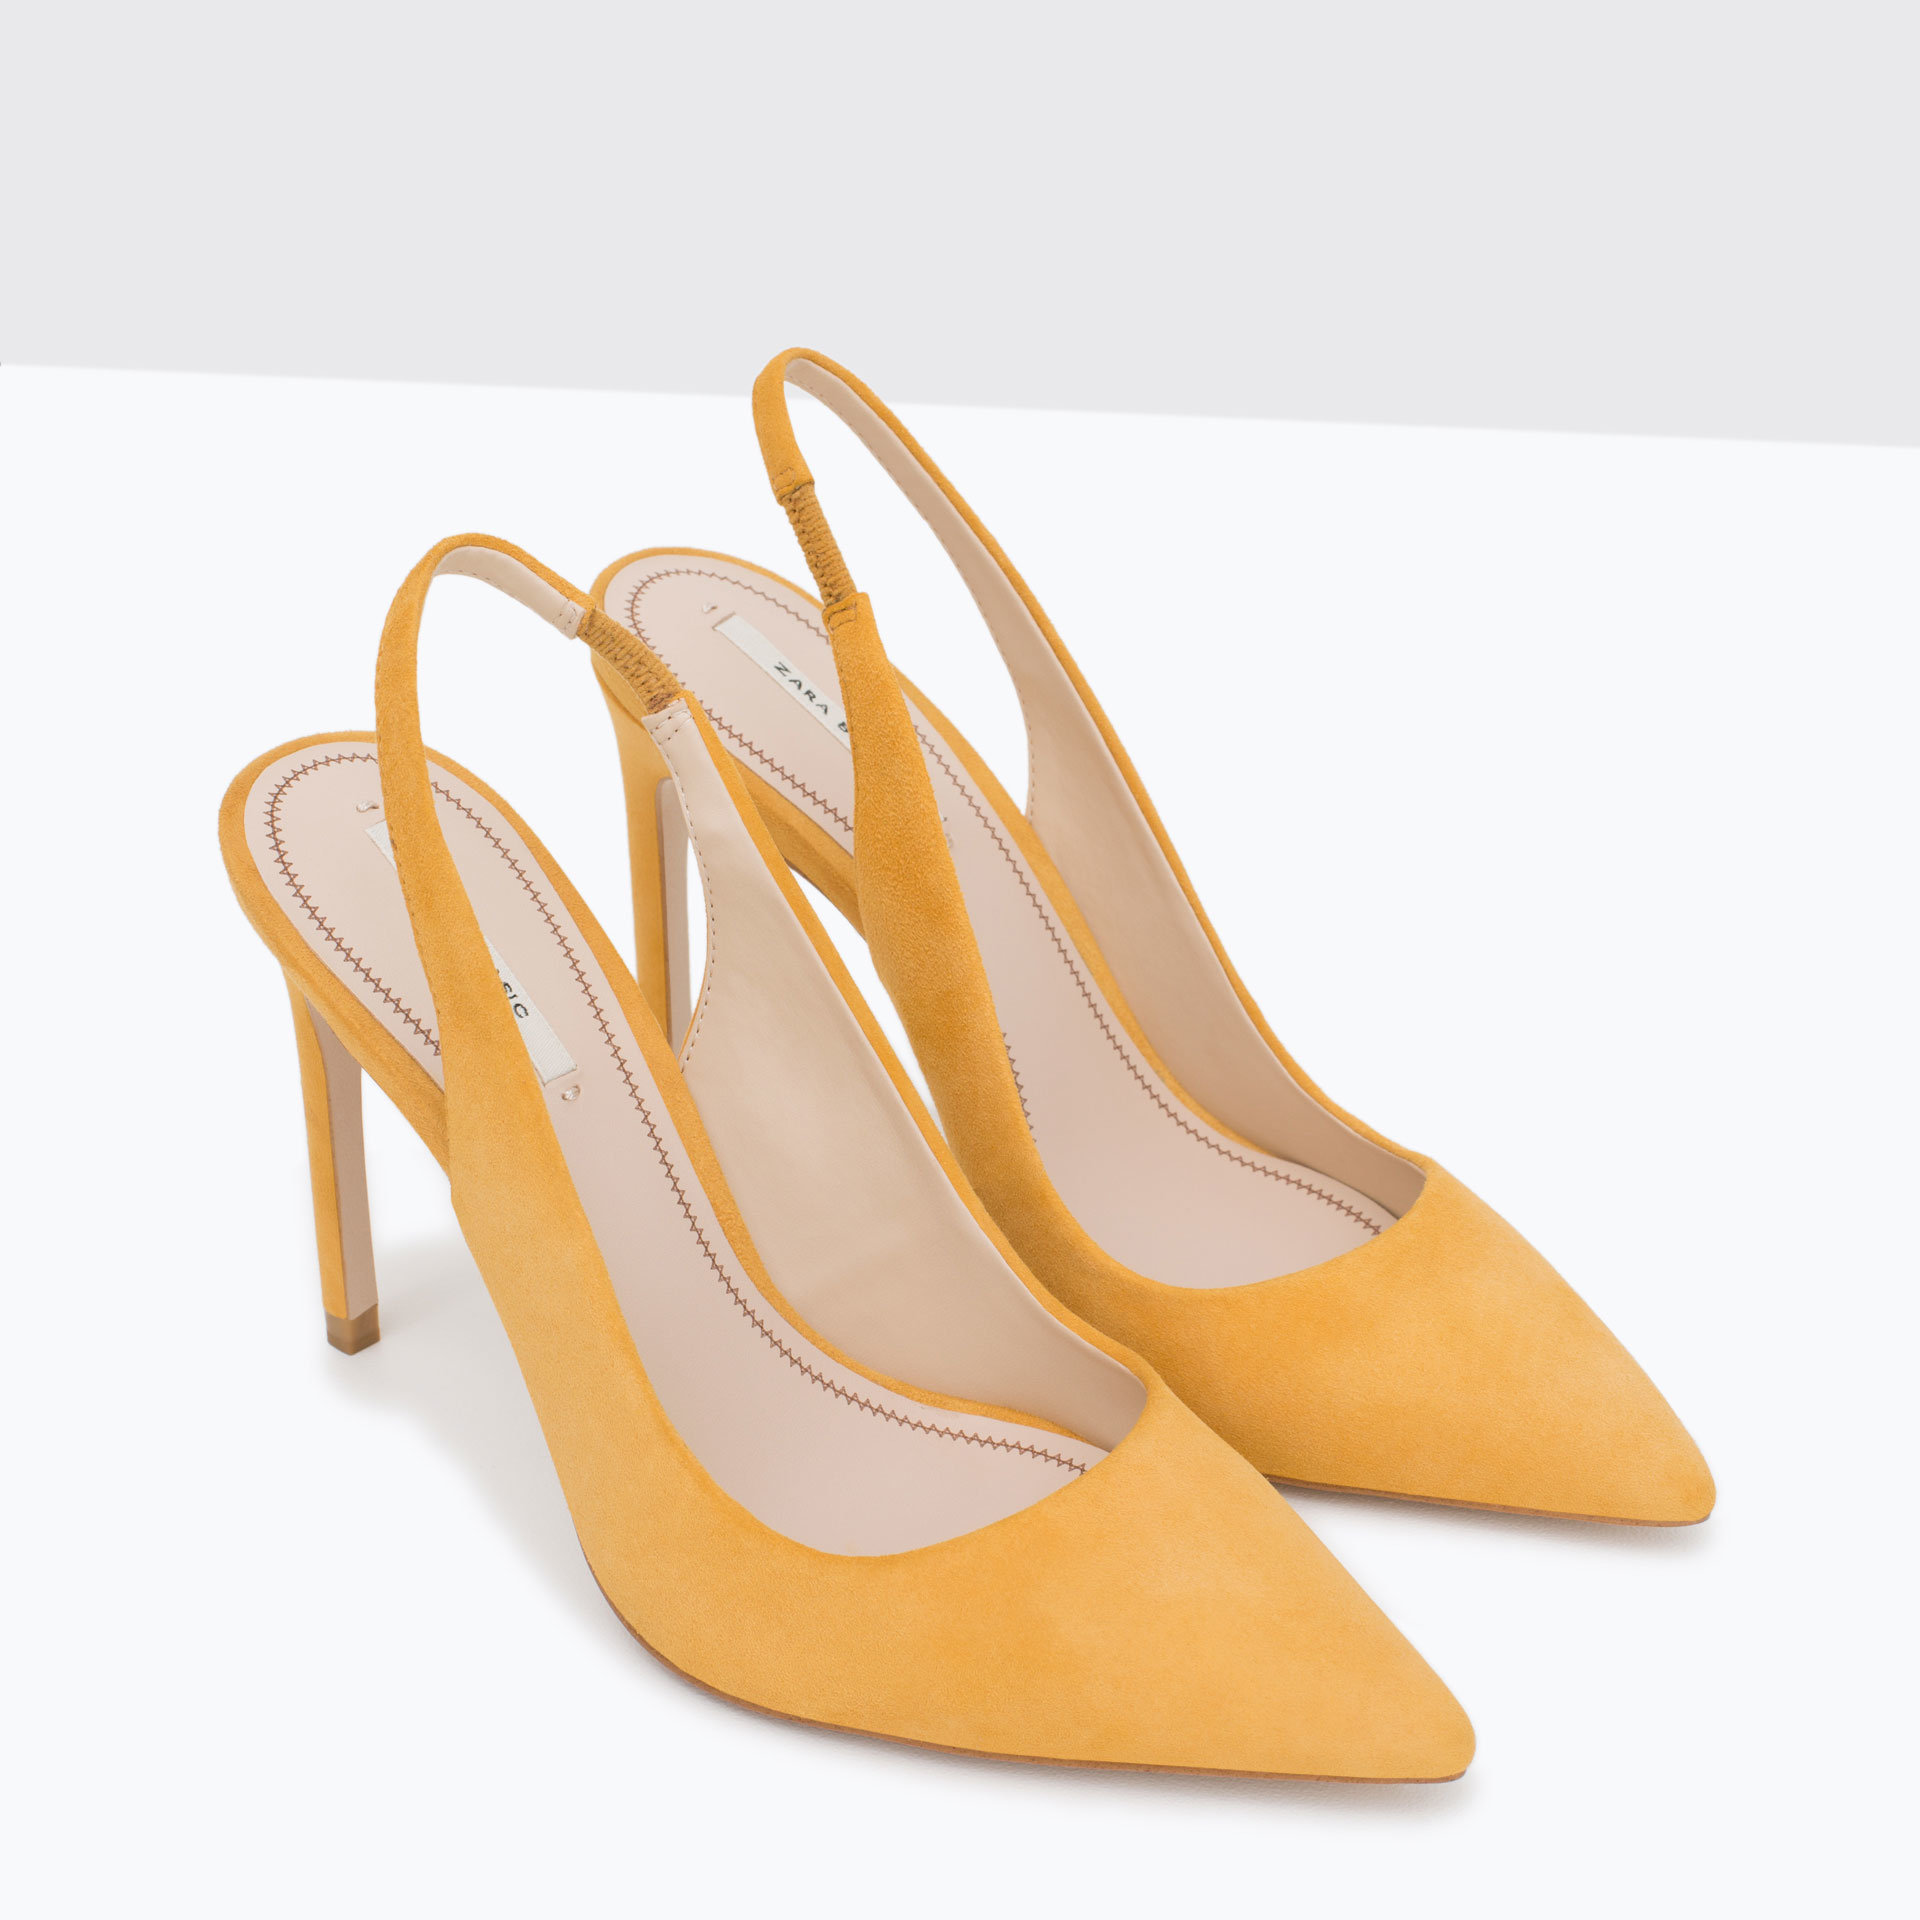 Zara Slingback High Heel Leather Shoes in Yellow | Lyst